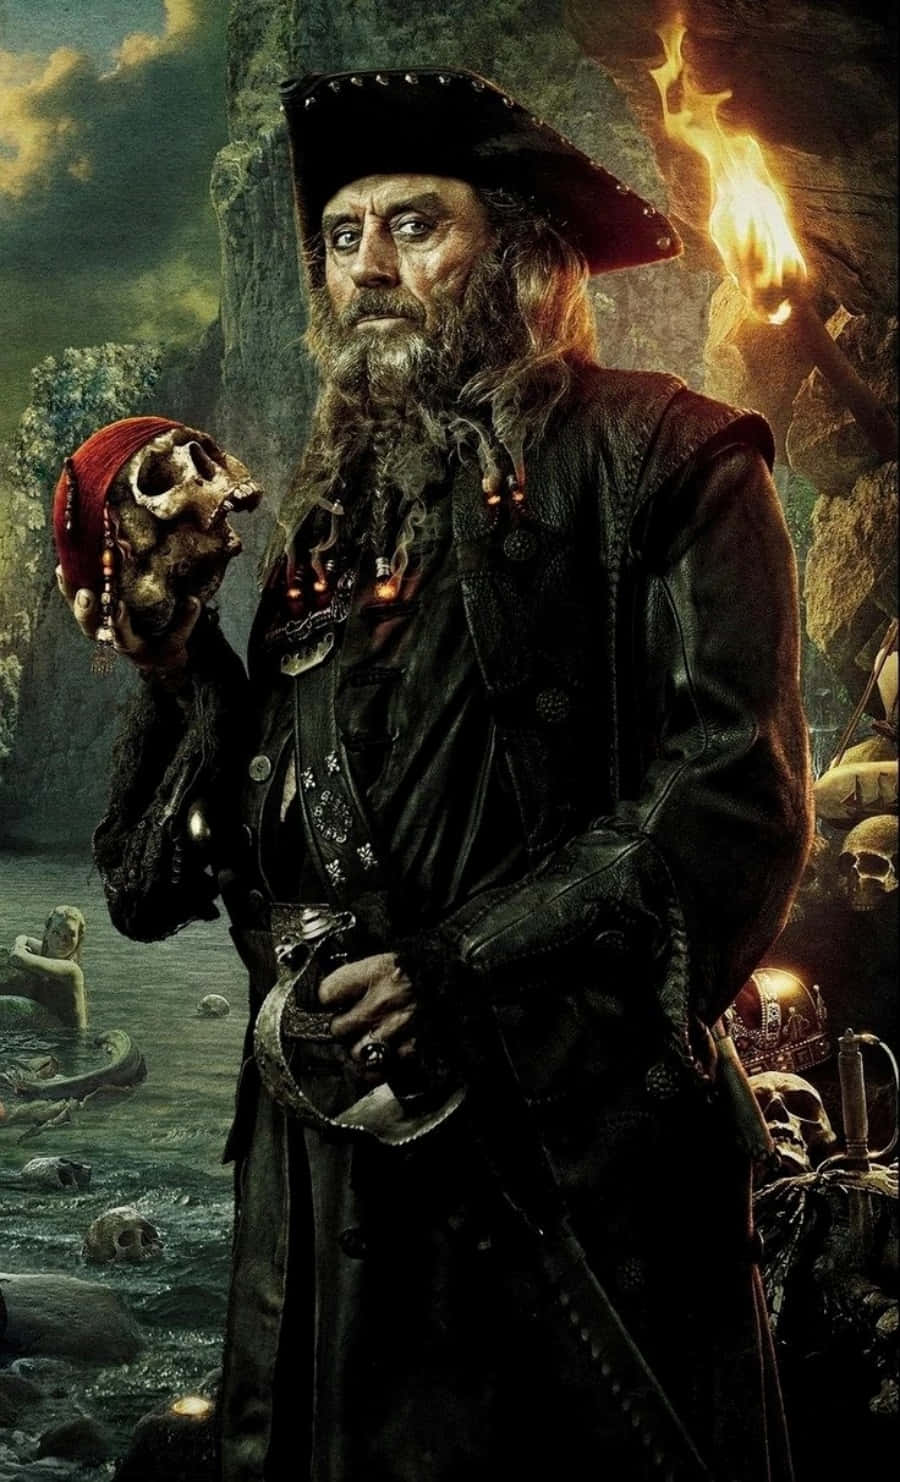 Beneath the Jolly Roger, a pirate prepares for his next voyage